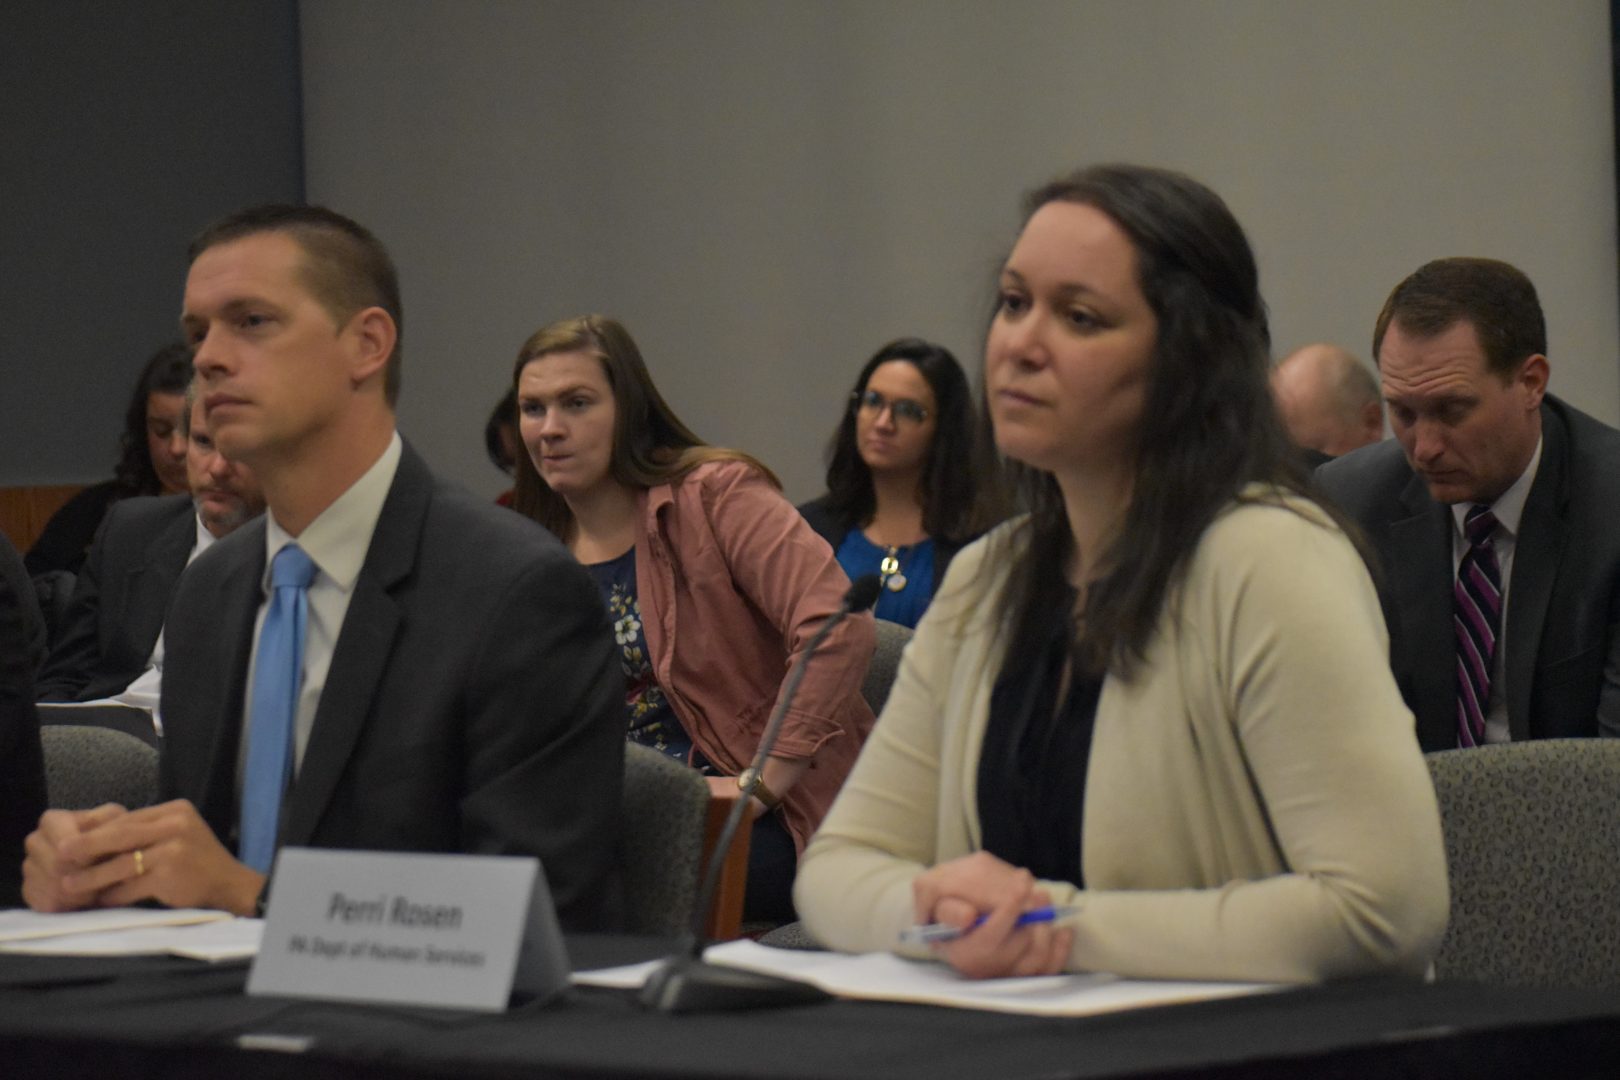 Matthew Wintersteen, left, and Perri Rosen, right, experts on suicide prevention, listen during a gun violence hearing in York on Nov. 22, 2019.